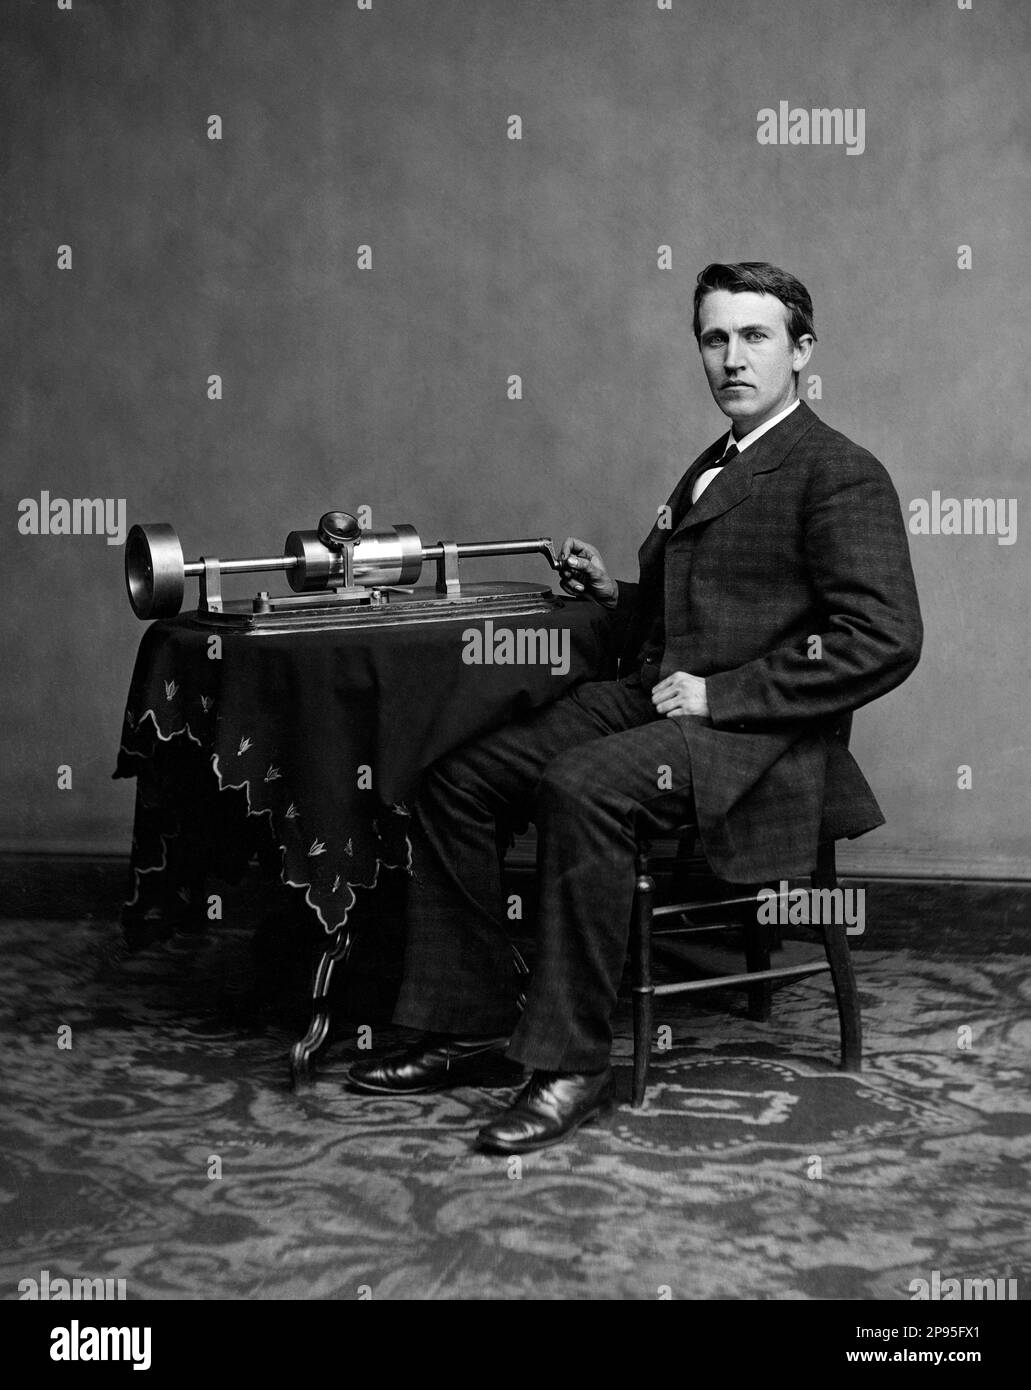 1878 , USA : The american  inventor and businessman THOMAS ALVA EDISON  ( February 11, 1847 – October 18, 1931 ) with his first and his early phonograph . Photo by Levin C. Handy . - foto storiche - foto storica  - scienziato - scientist  - portrait - ritratto  - engraving - incisione  - CHIMICO - CHEMISTRY - CHIMICIAN - FOTOGRAFO - FOTOGRAFIA - PHOTOGRAPHER - PHOTOGRAPHY - SCIENZIATO - SCIENTIST  - GRAMMOFONO ----  Archivio GBB Stock Photo